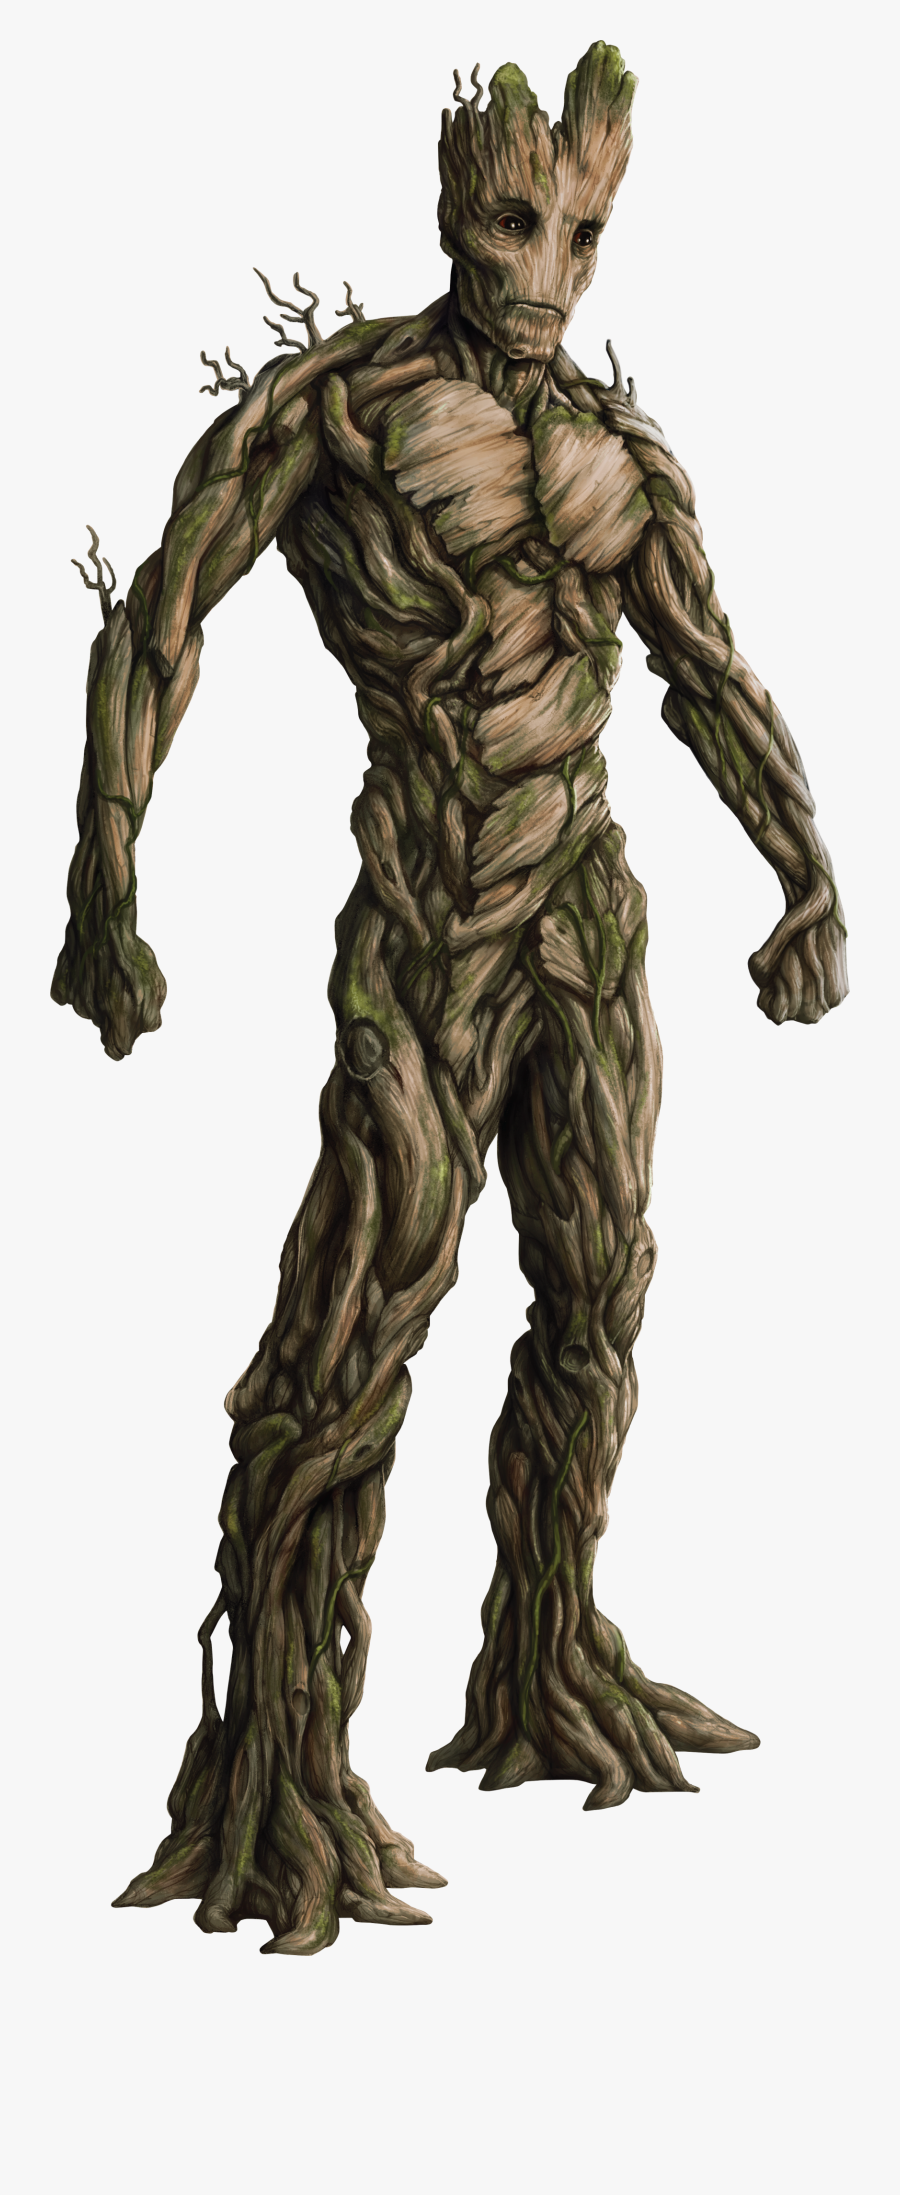 Image Gg Fh Marvel - Groot Png, Transparent Clipart